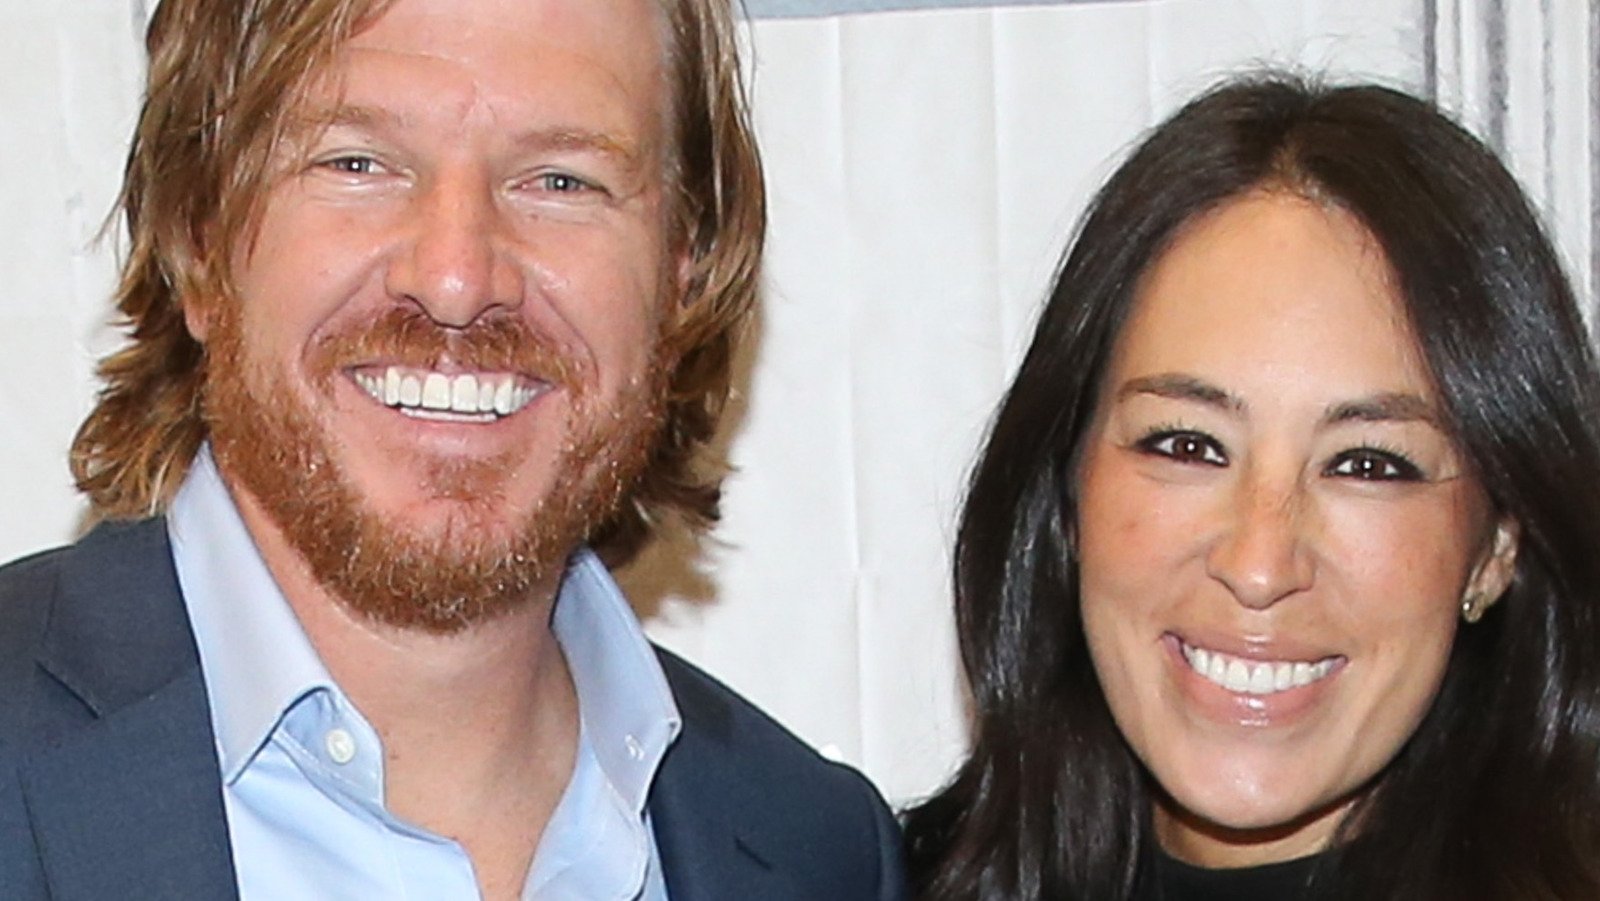 Chip and Joanna Gaines became celebrities thanks to their wildly popular ho...